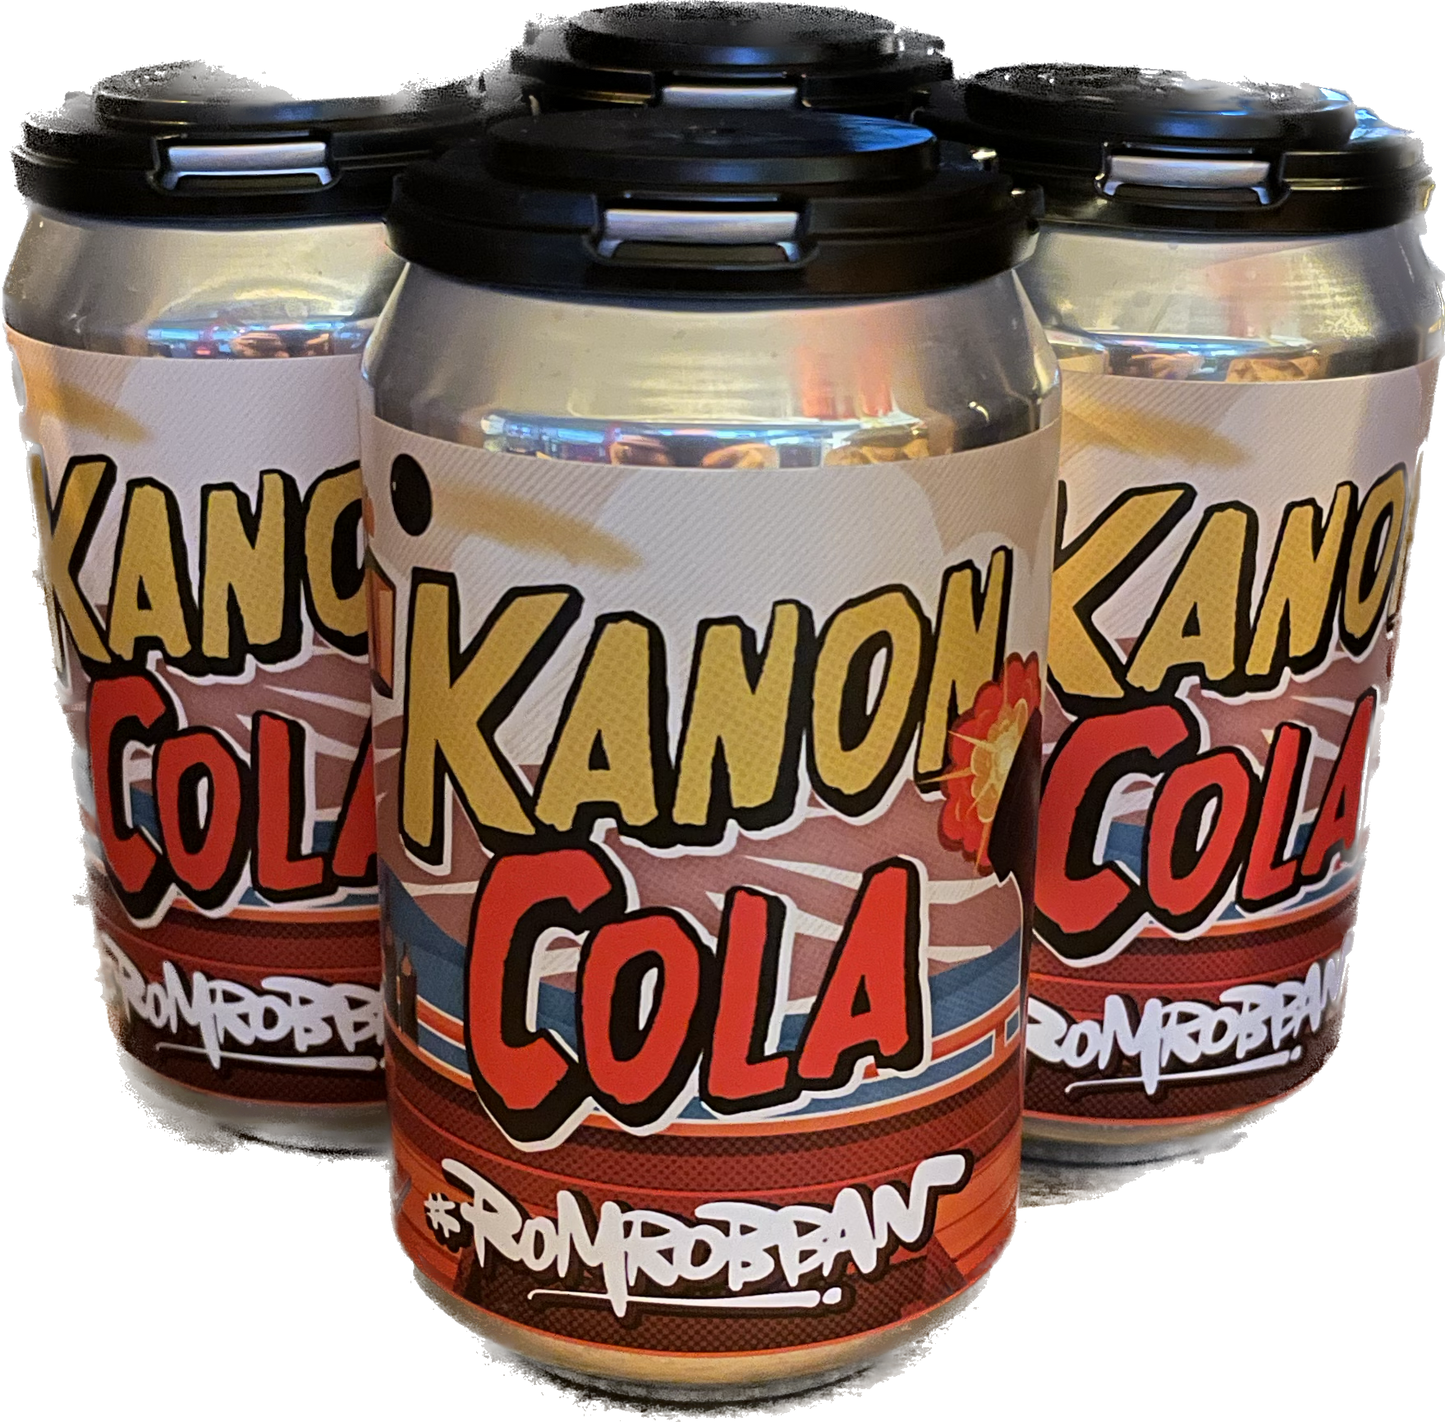 Kanon Cola 4-pack